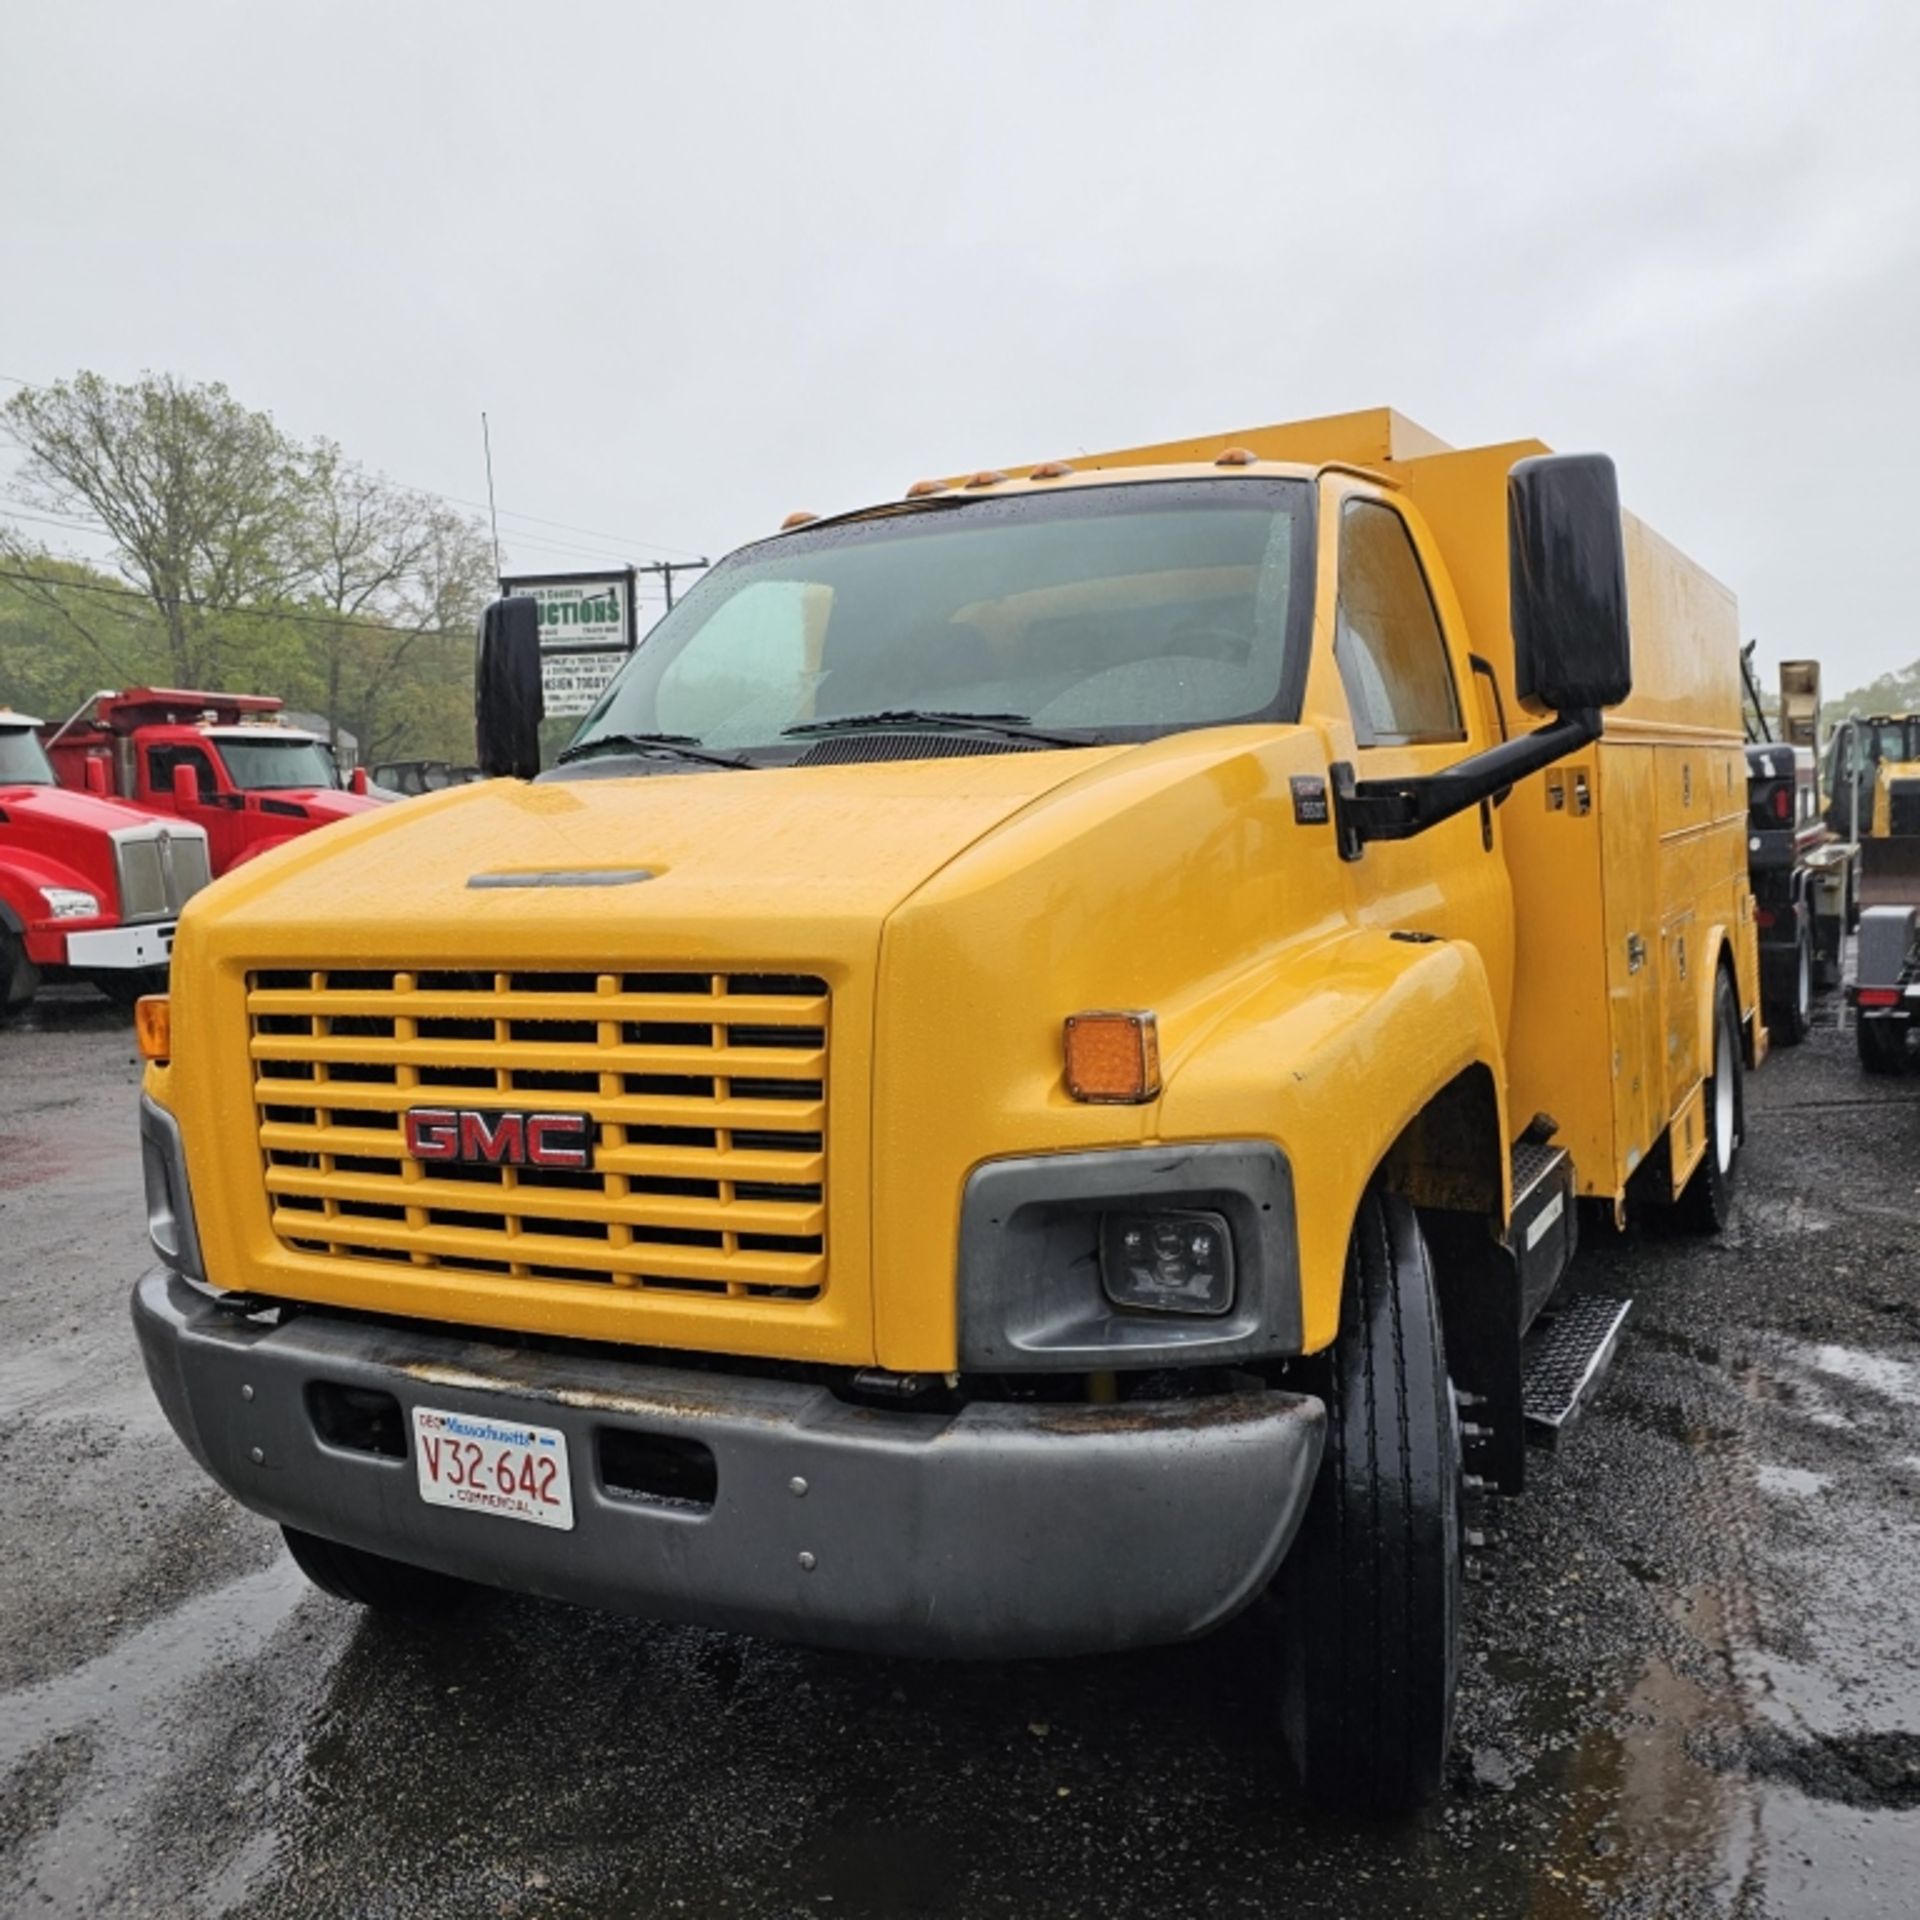 2004 Chevy C6500 Service Truck - Image 2 of 11